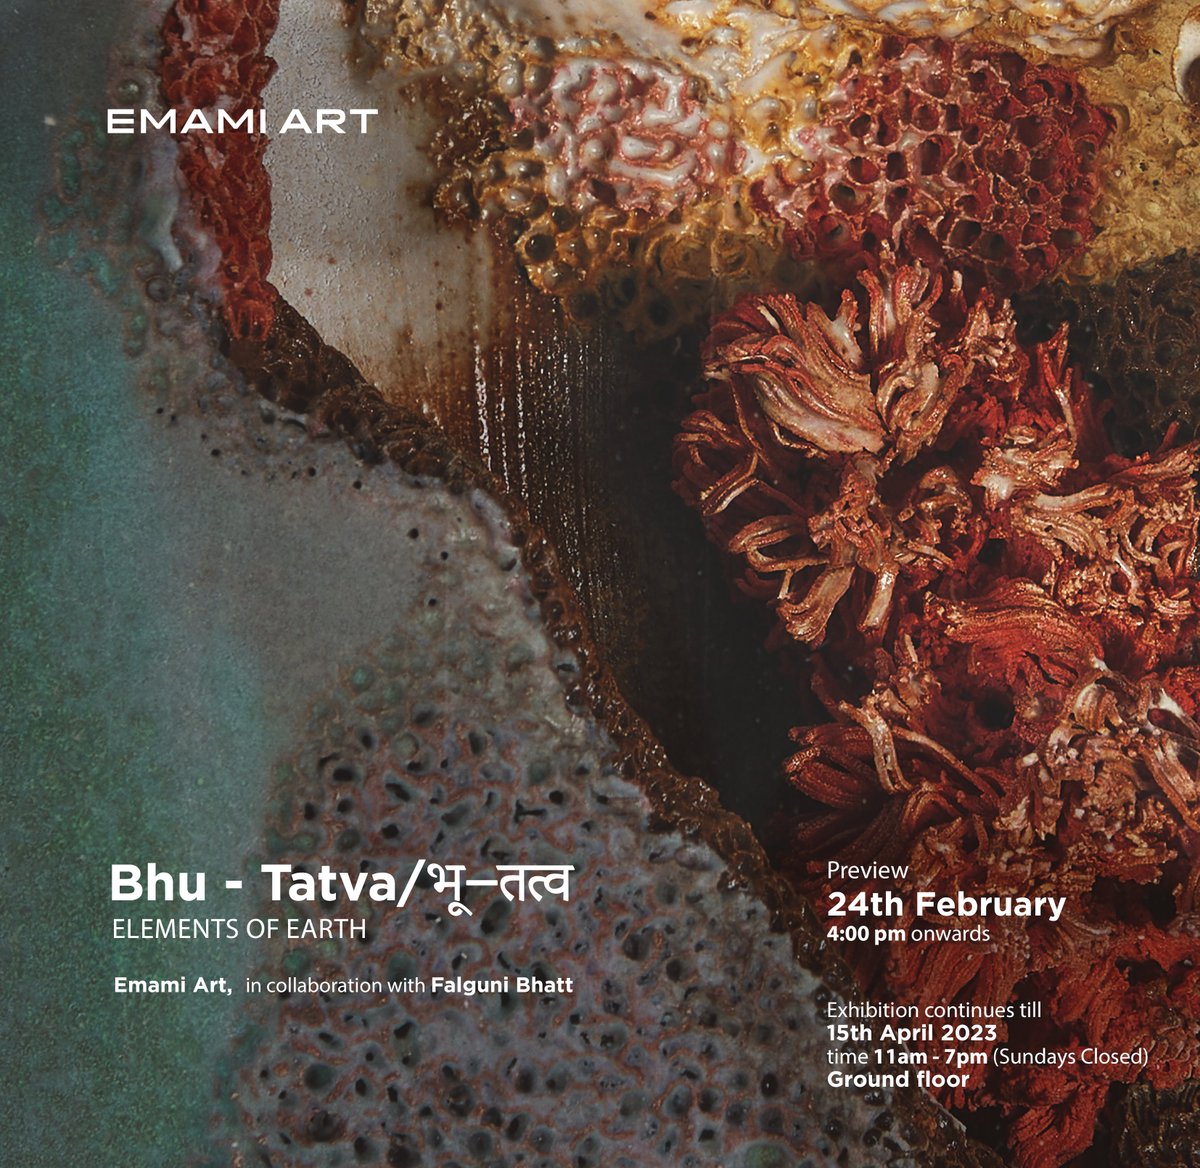 Emami Art presents Bhu - Tatva / भू – तत्व: Elements of Earth, the second edition of contemporary ceramics exhibition in collaboration with Falguni Bhatt. 

#ceramicsart #ceramics #artexhibition #exhibitionista  #emamiart